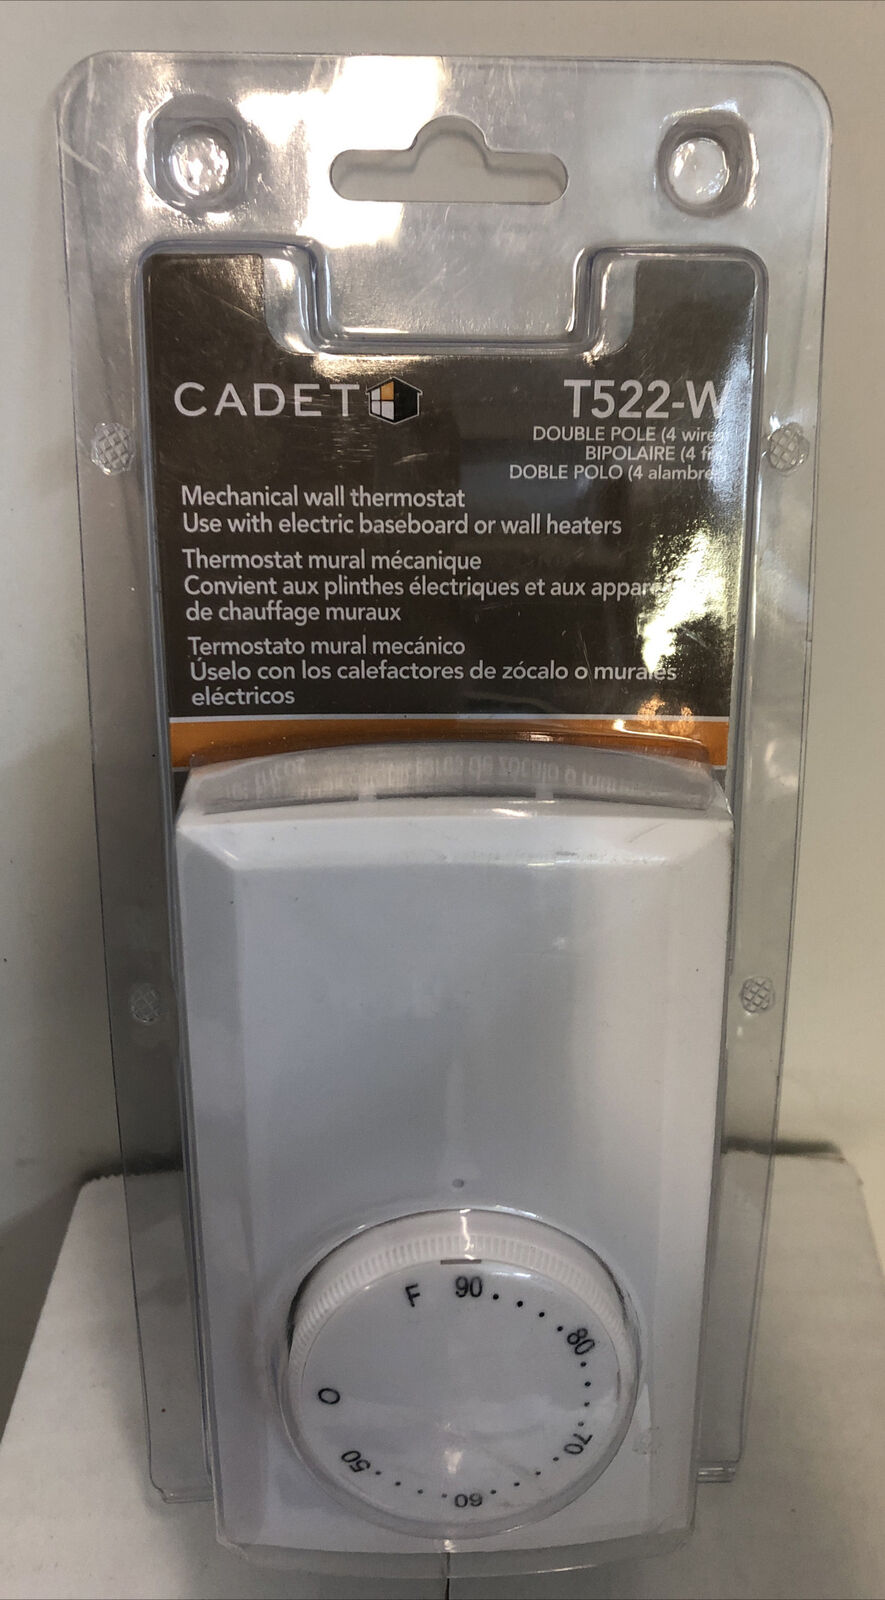 Cadet Mechanical Wall Thermostat - T522-W